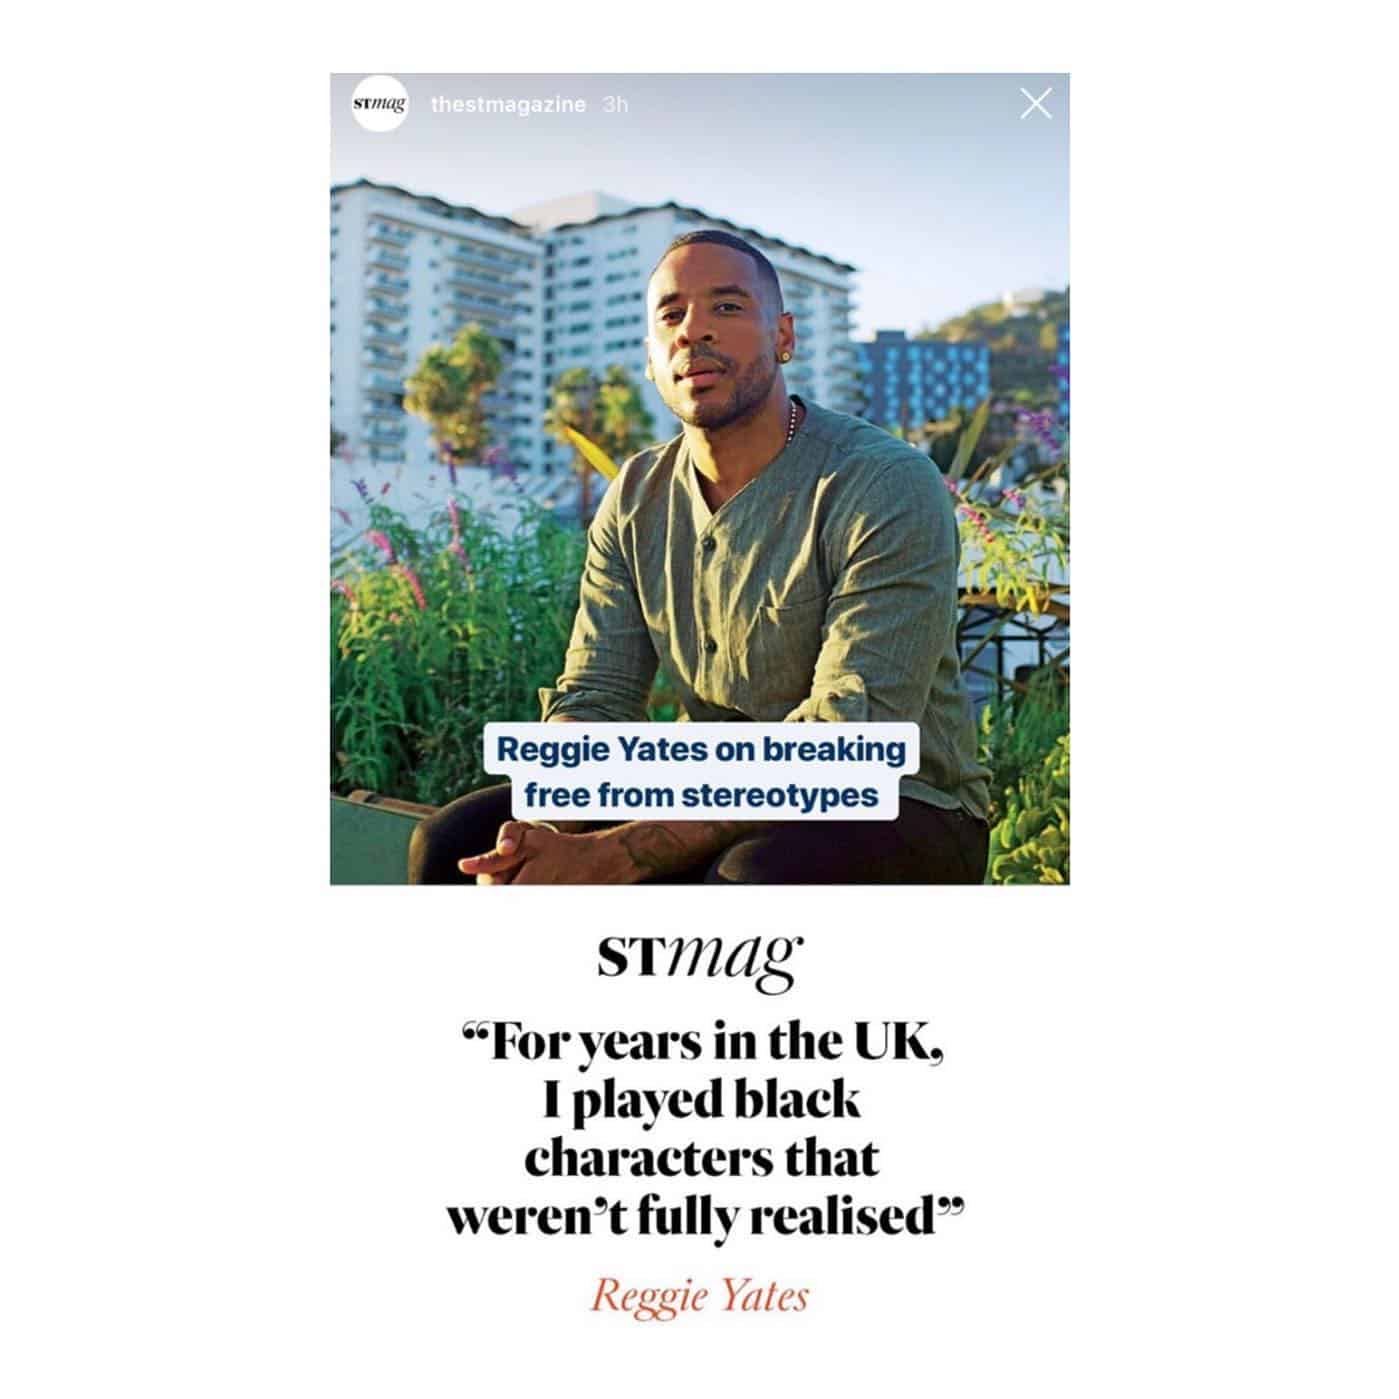 @regyates writes about his new documentary in this weekends @thestmagazine  .
.
.
TV’s Black Renaissance: Reggie Yates in Hollywood is on @bbctwo in July .
.
.